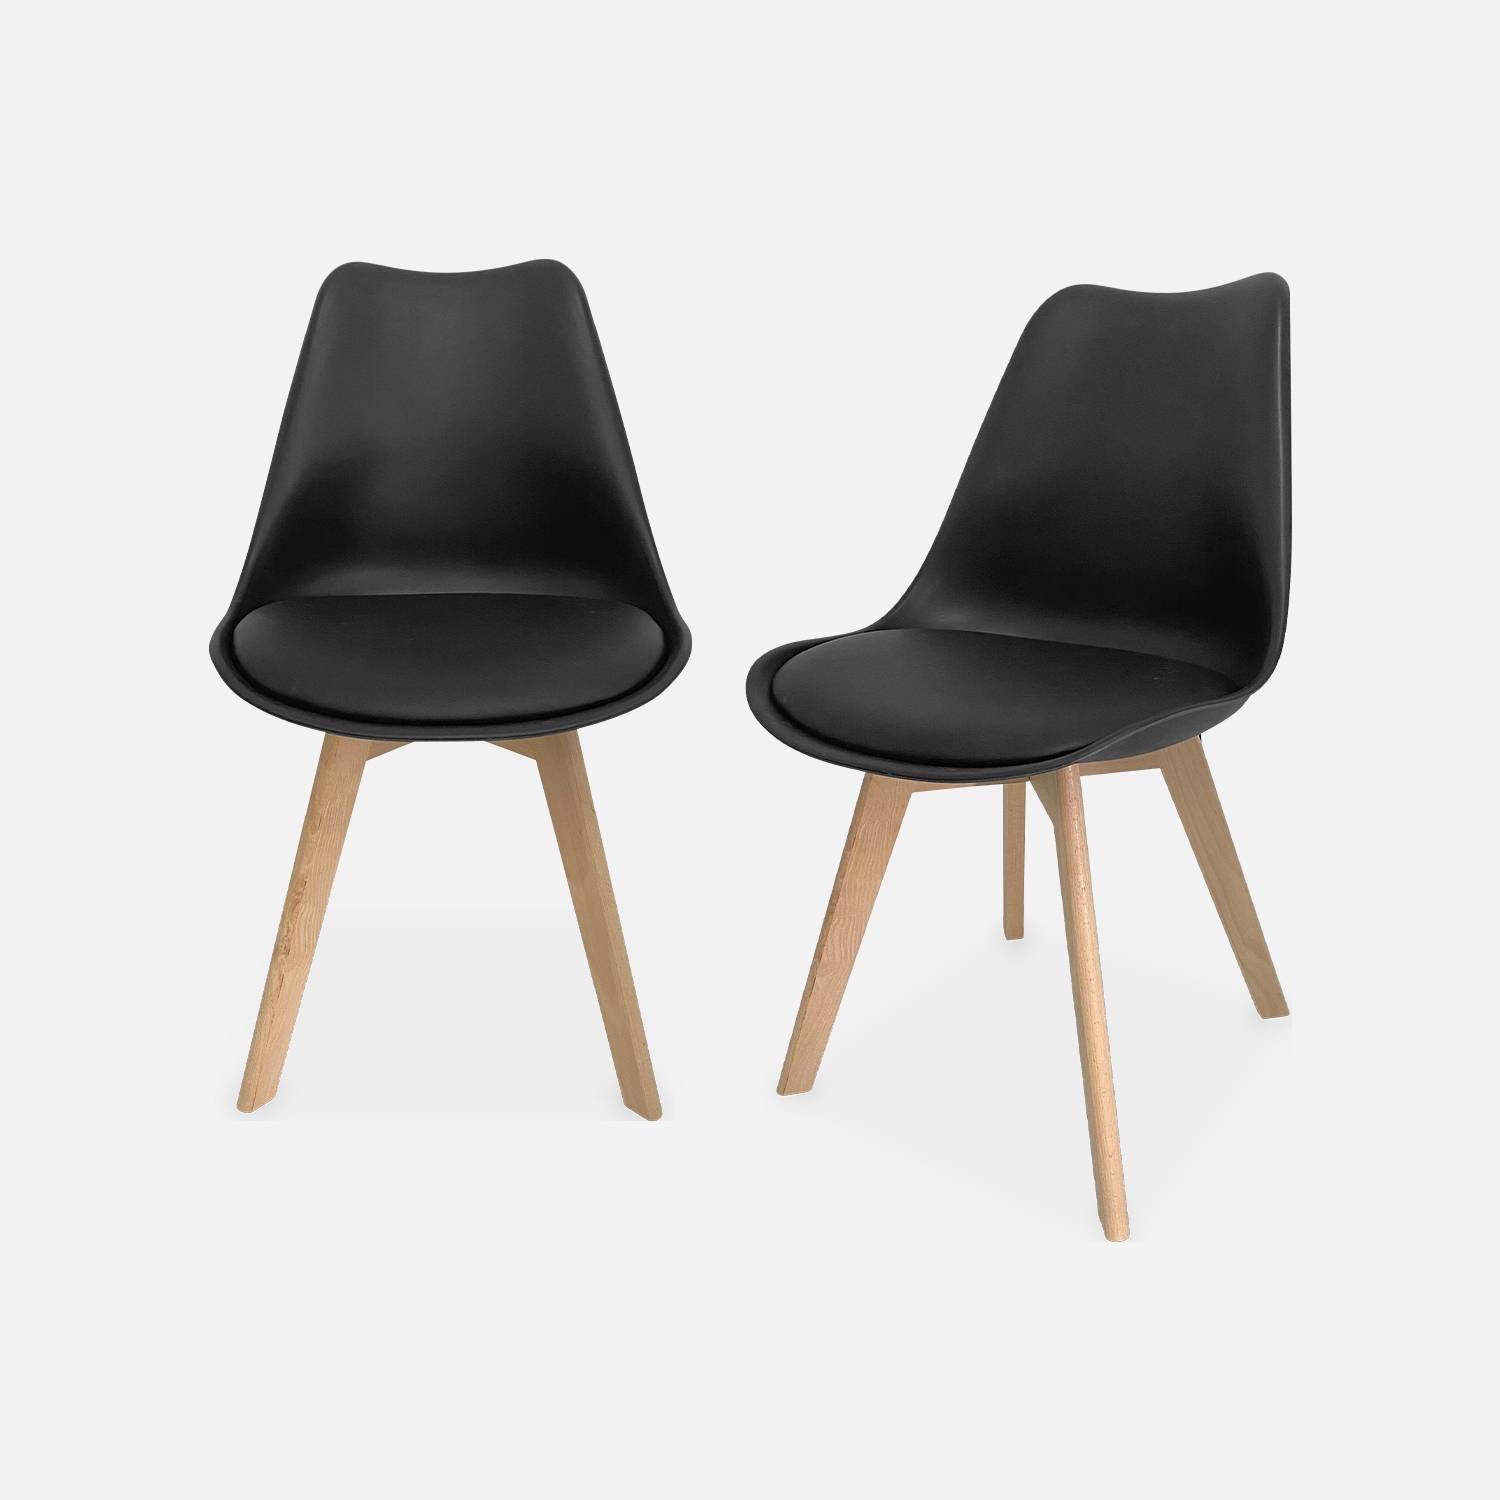 Pair of scandi-style dining chairs | sweeek